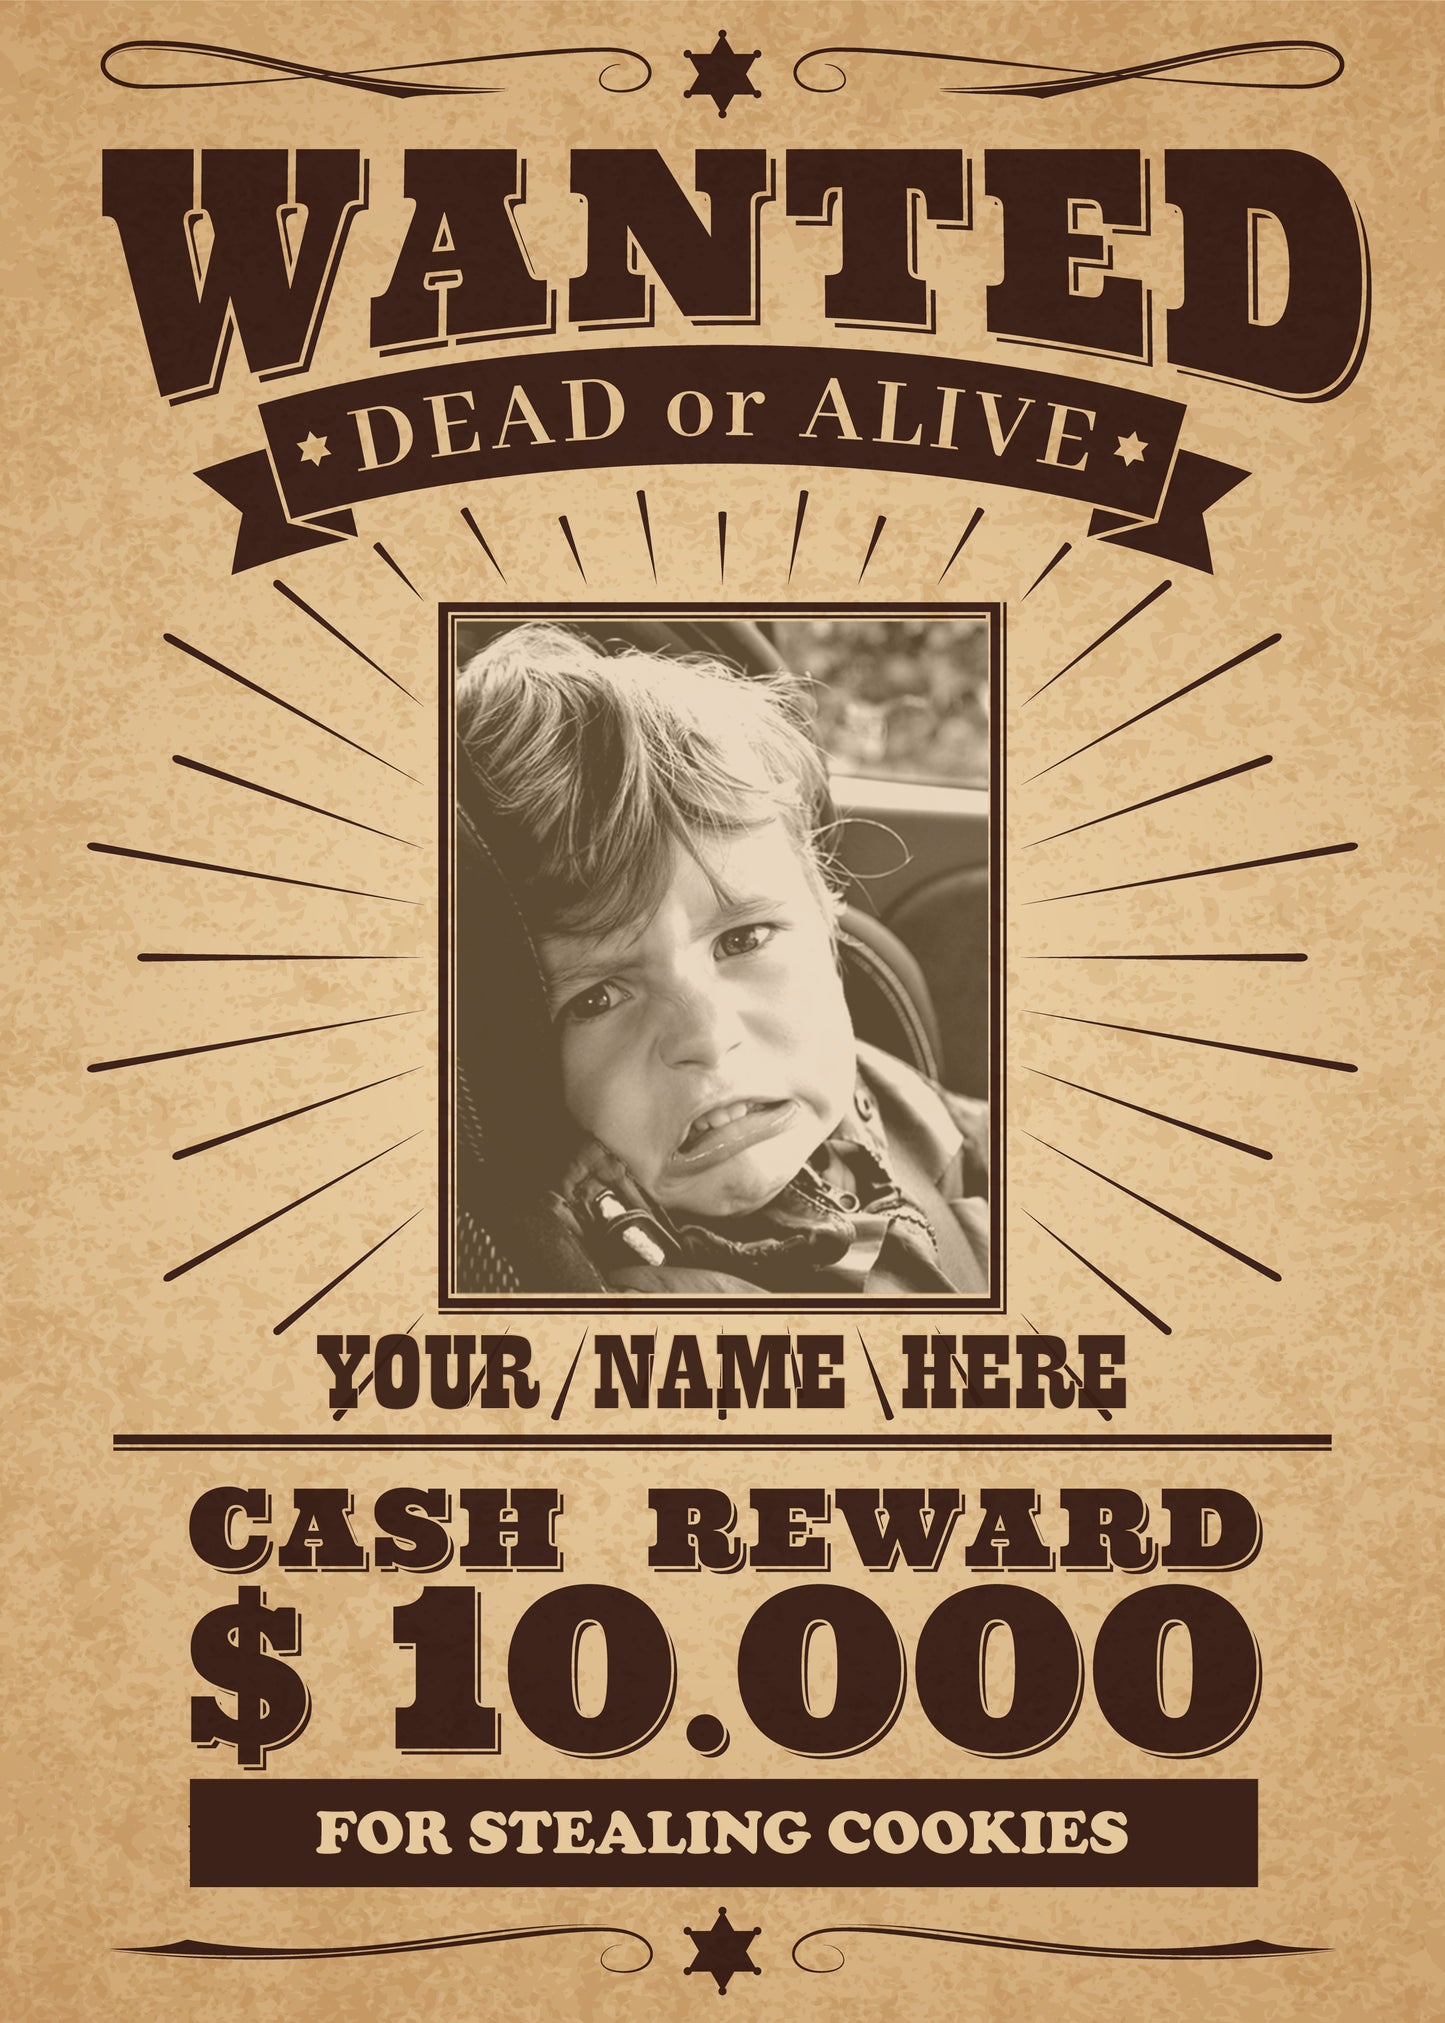 Simple Personalized Wanted Poster, With Your Photo, Name and Crime, Ready in 1-2 Days, JPEG A4 or Letter Size